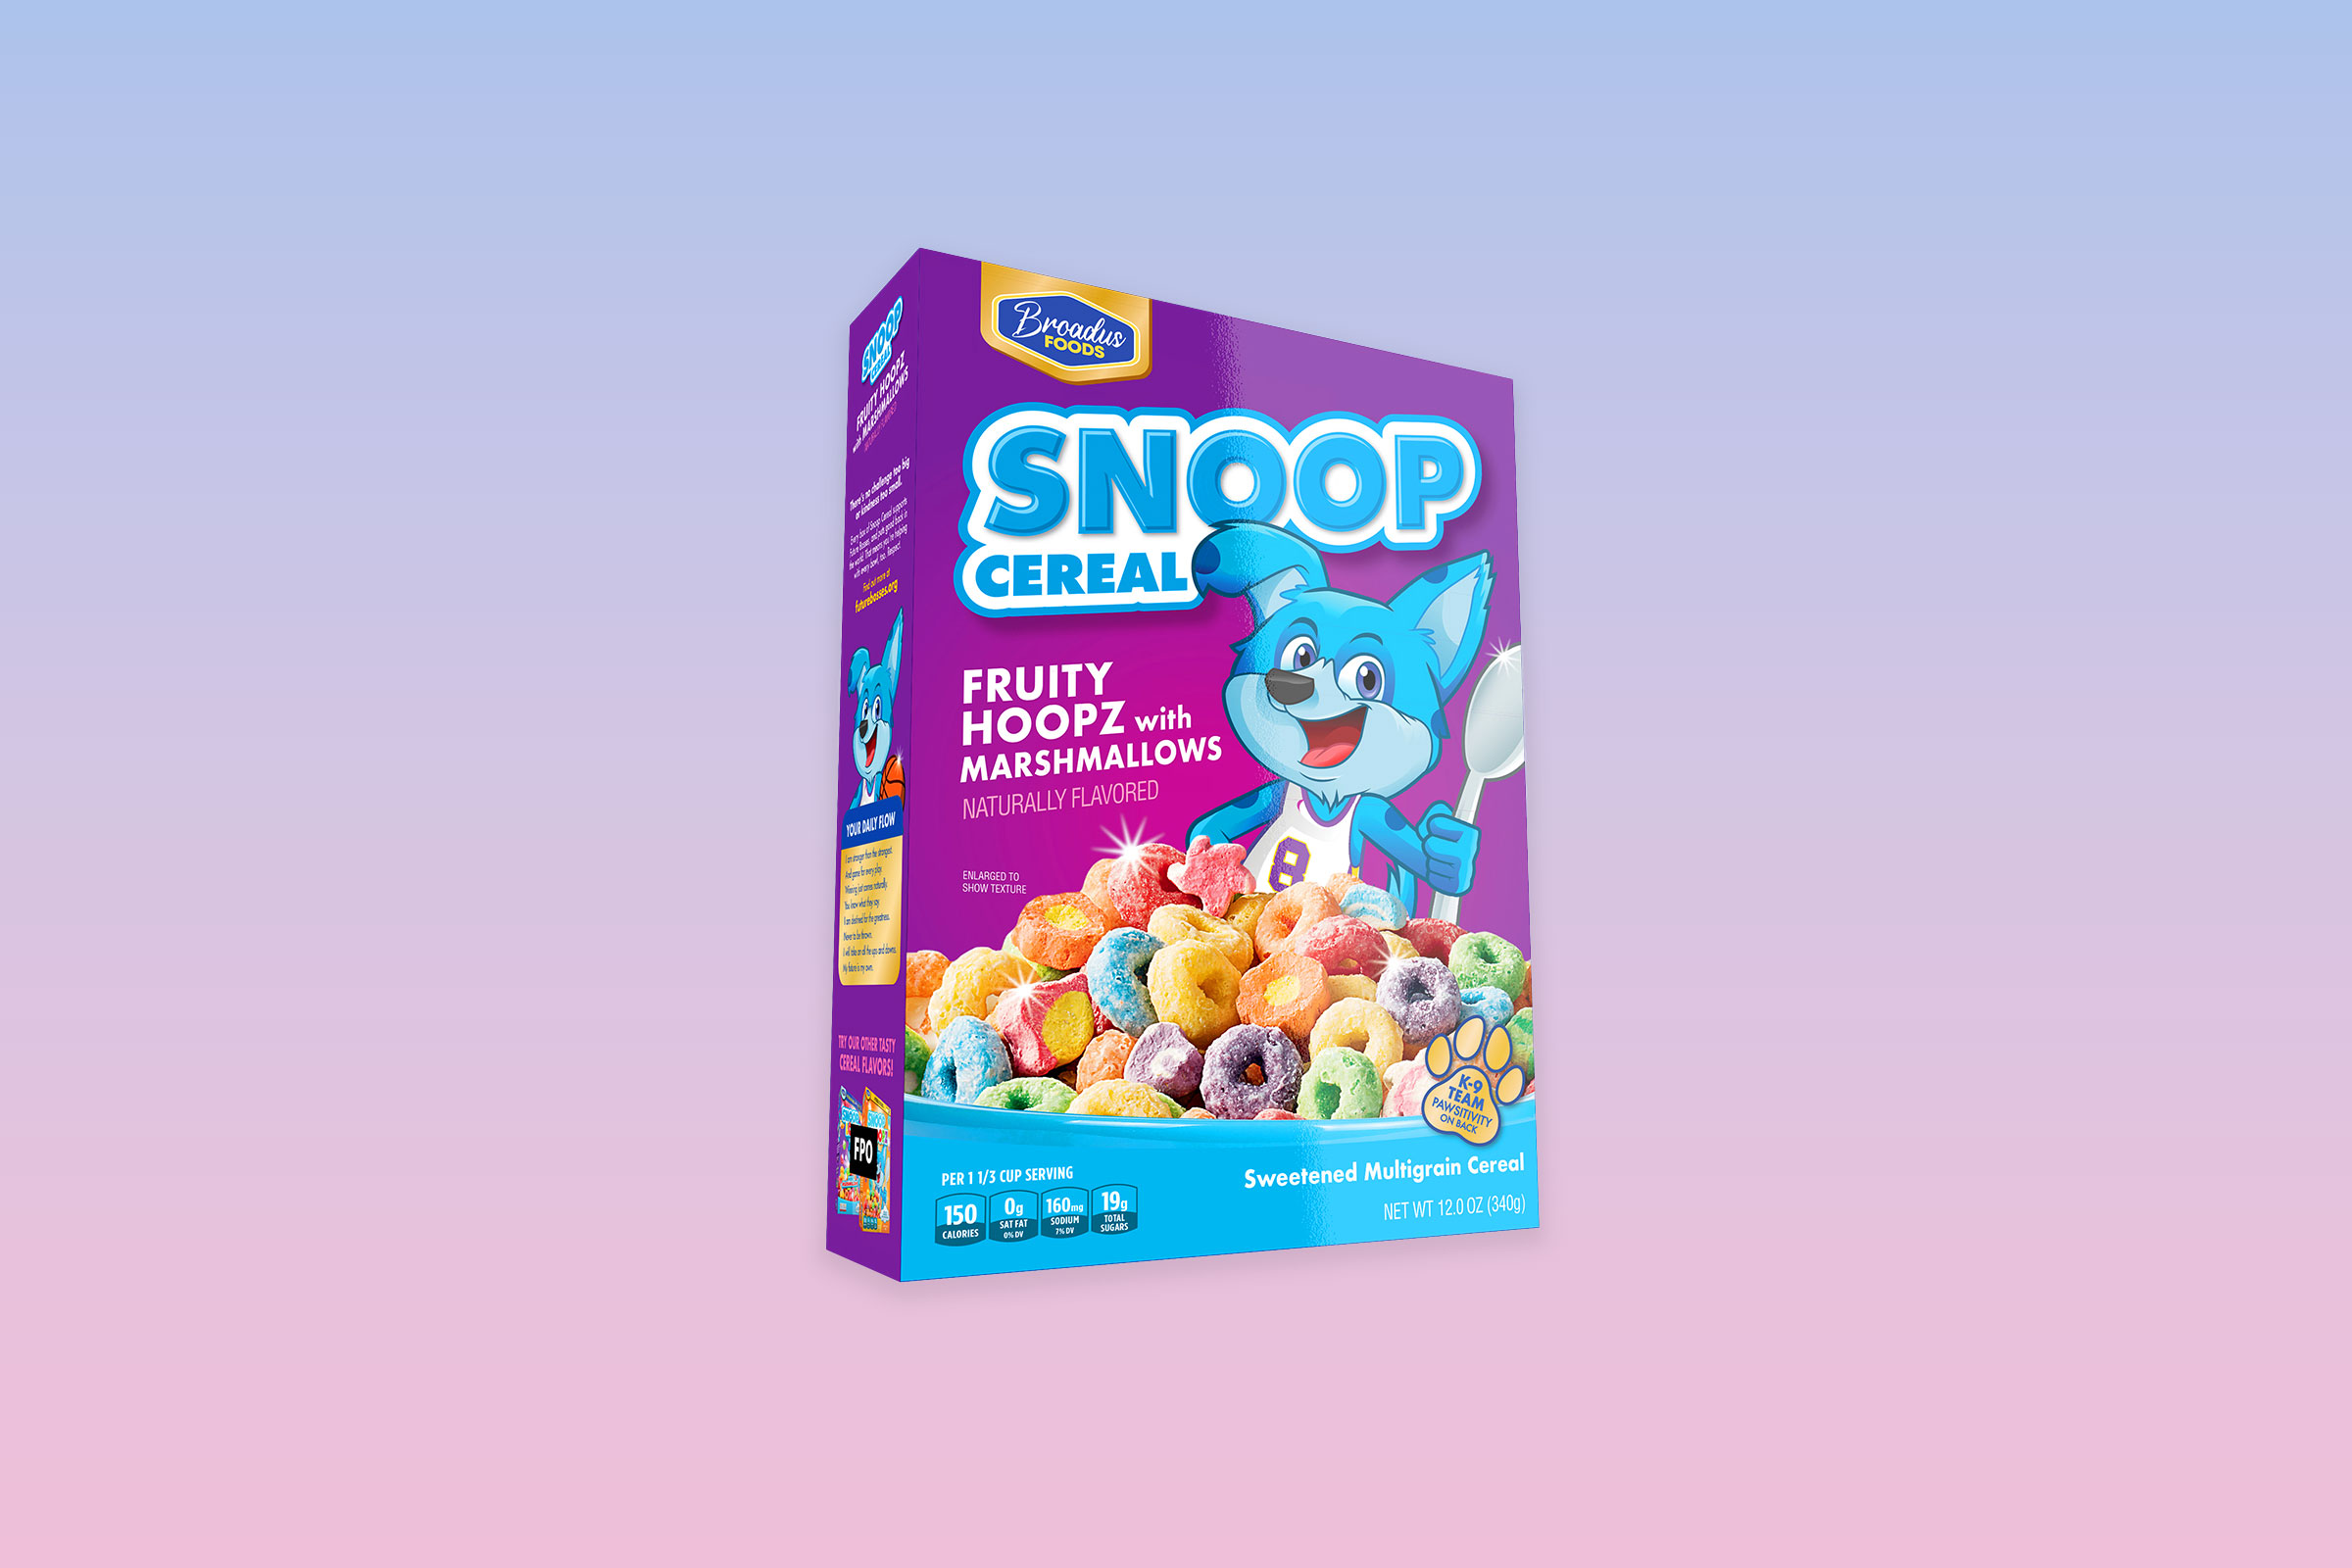 A box of Snoop Cereal which has colorful cereal on it and a blue cartoon dog holding a spoon